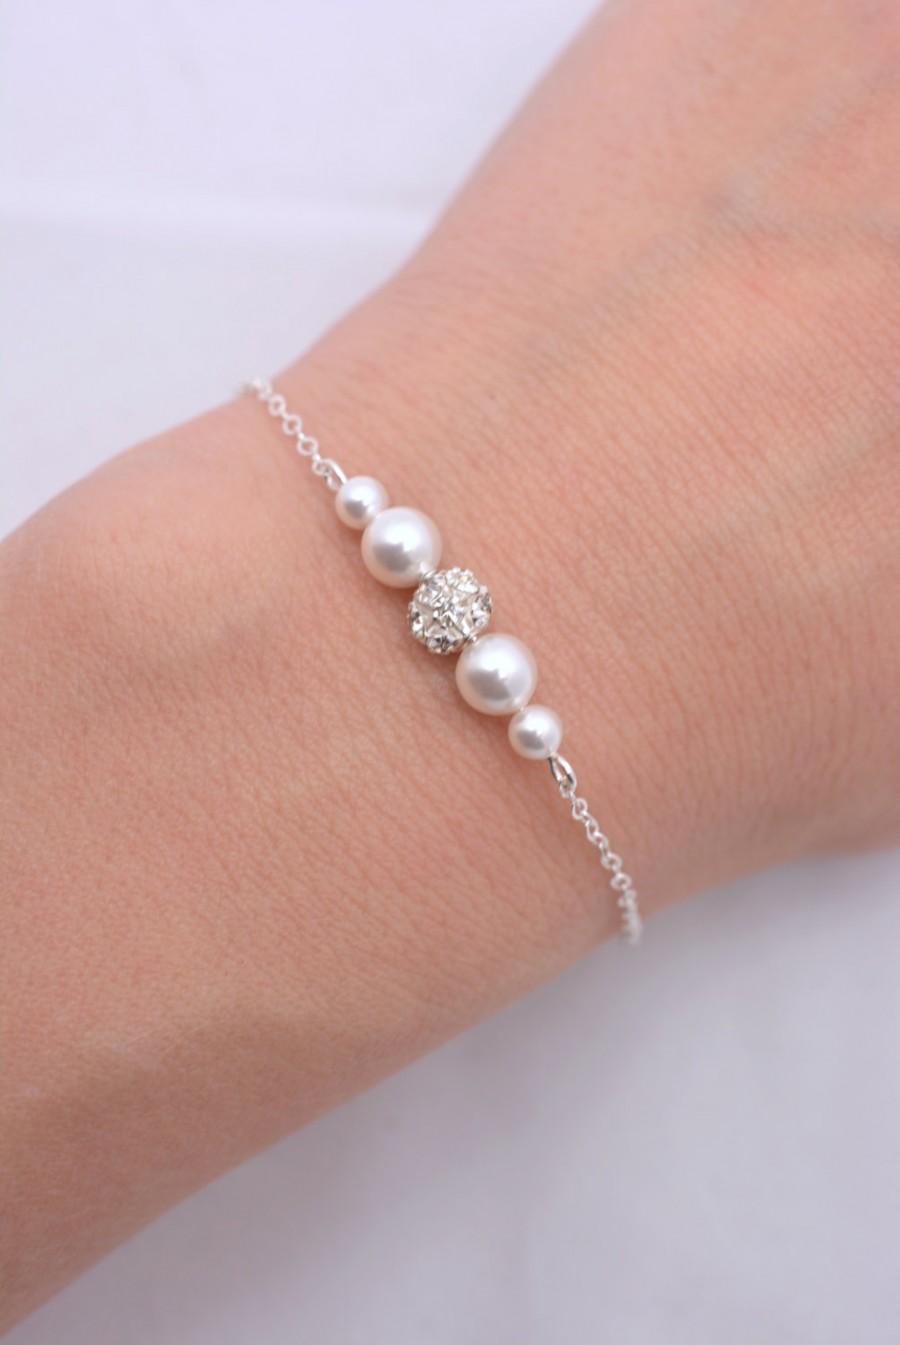 Wedding - Set of 7 Pearl and Rhinestone Bracelets, 7 Bridesmaid Bracelets, Pearl and Crystal Bracelets, Floating Pearl, Sterling Silver Chain 0224